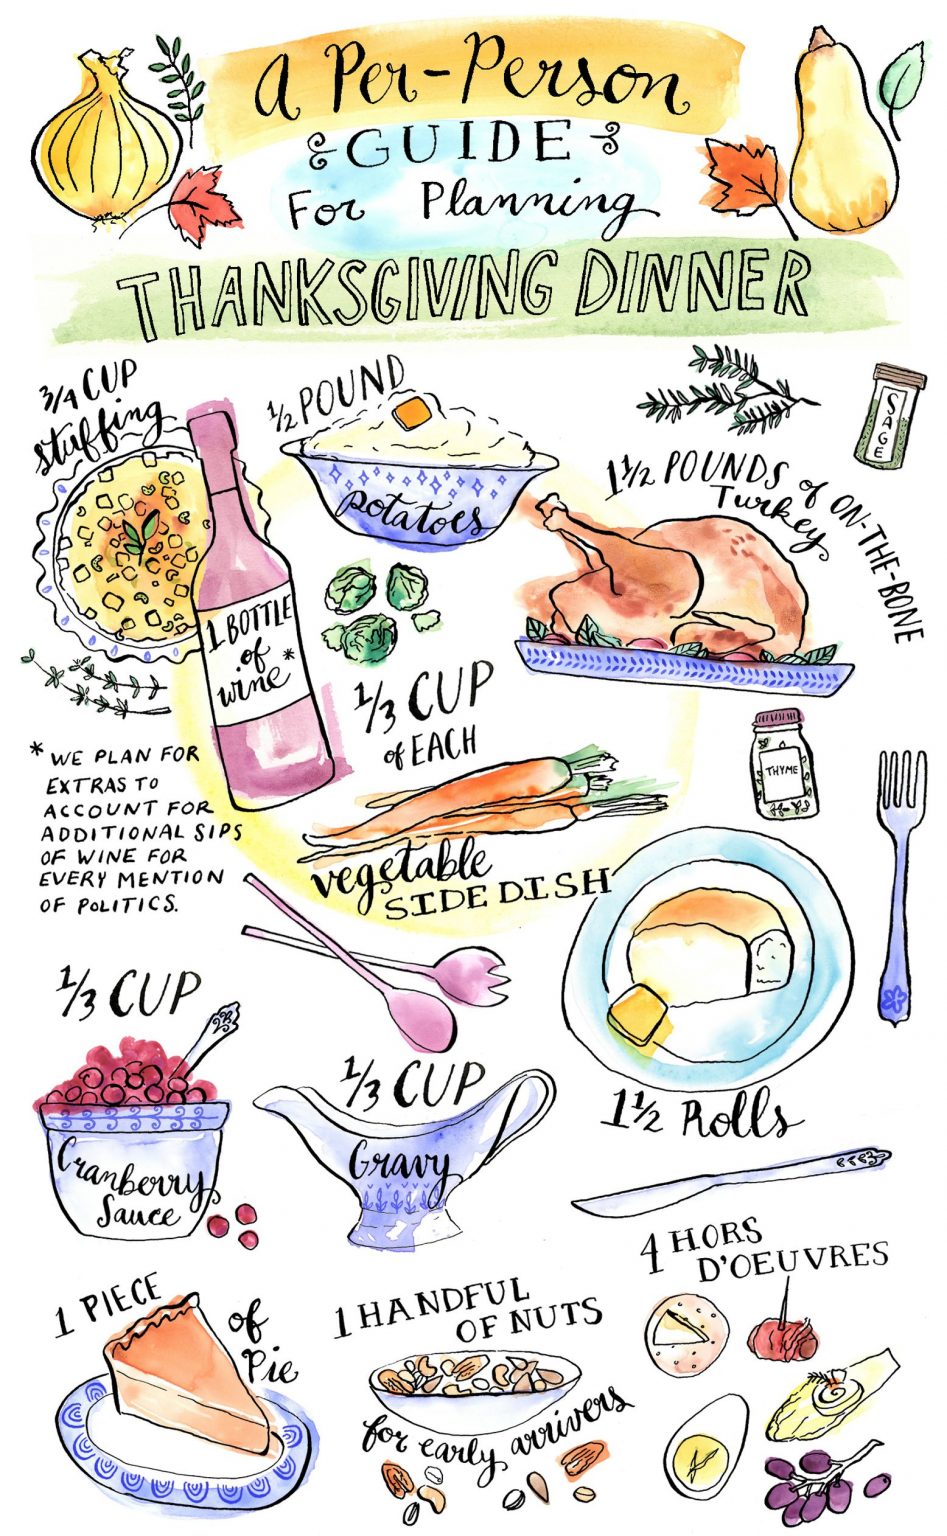 definitive-per-person-guide-to-planning-thanksgiving-dinner-30